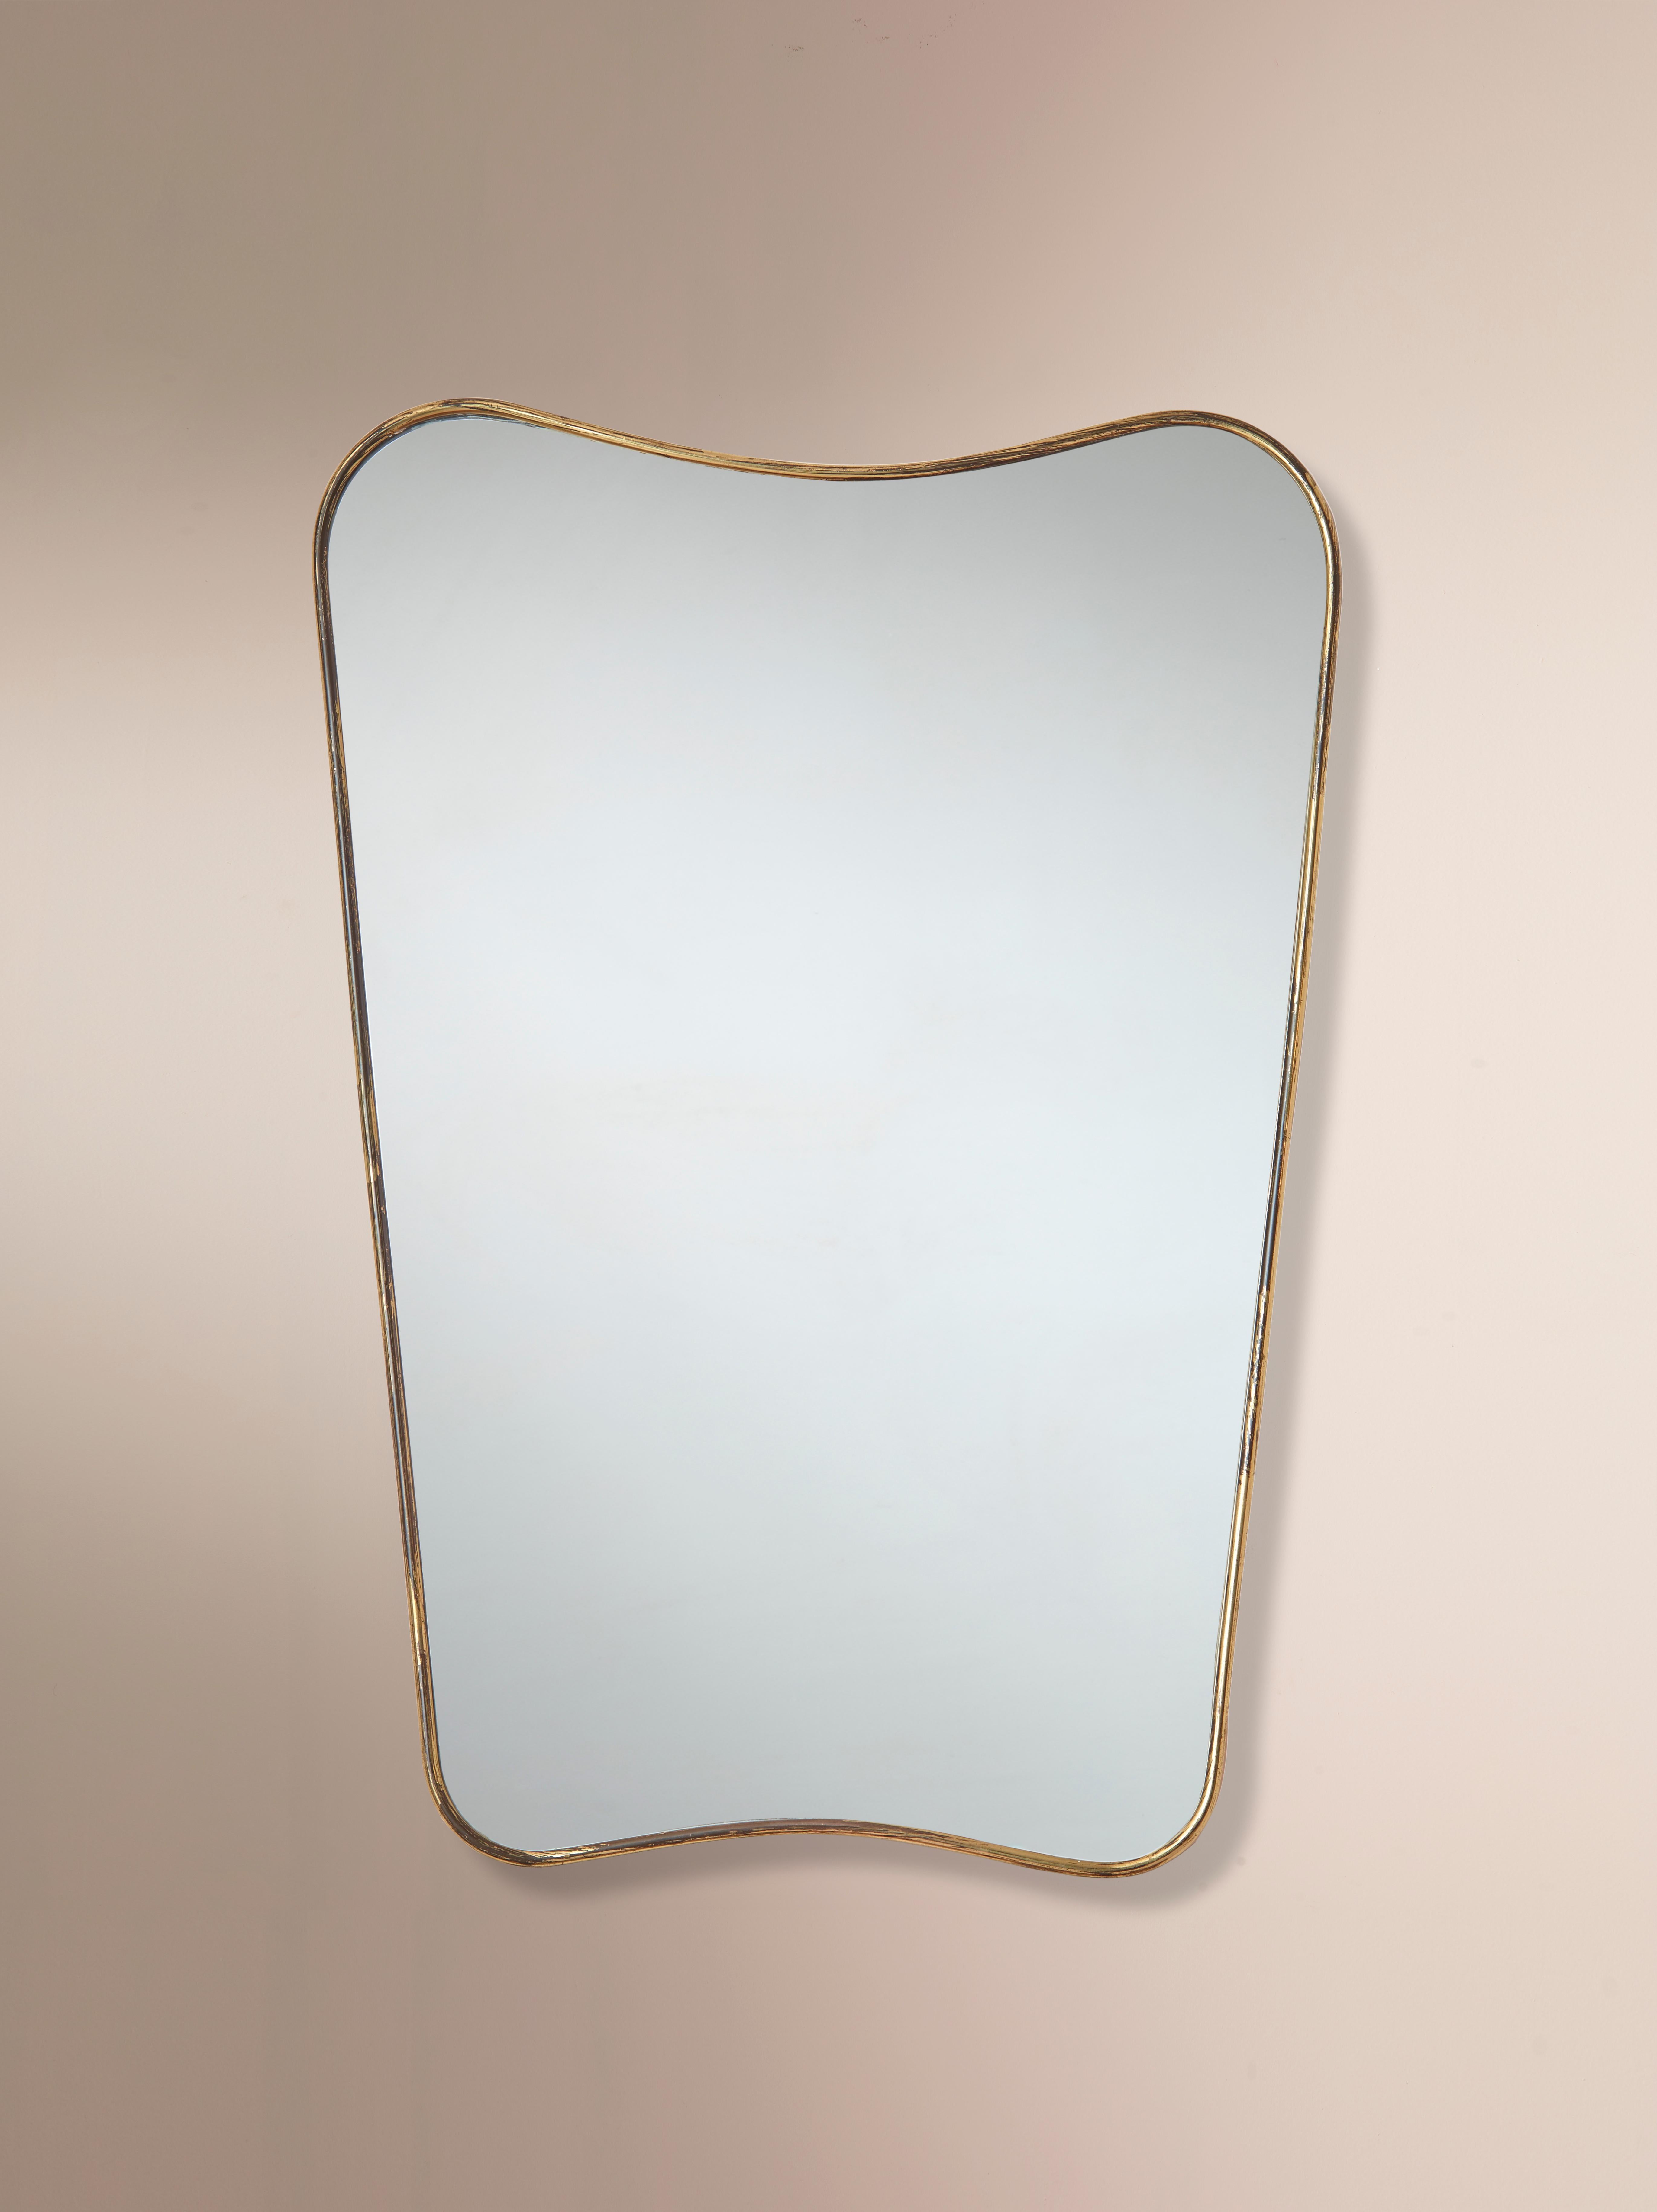 An Italian brass wall mirror from the 1960s with simple yet sophisticated, harmonious lines.

This Italian brass mirror is in good vintage condition. The brass has aged beautifully, showcasing its great patina with some oxidations that give it